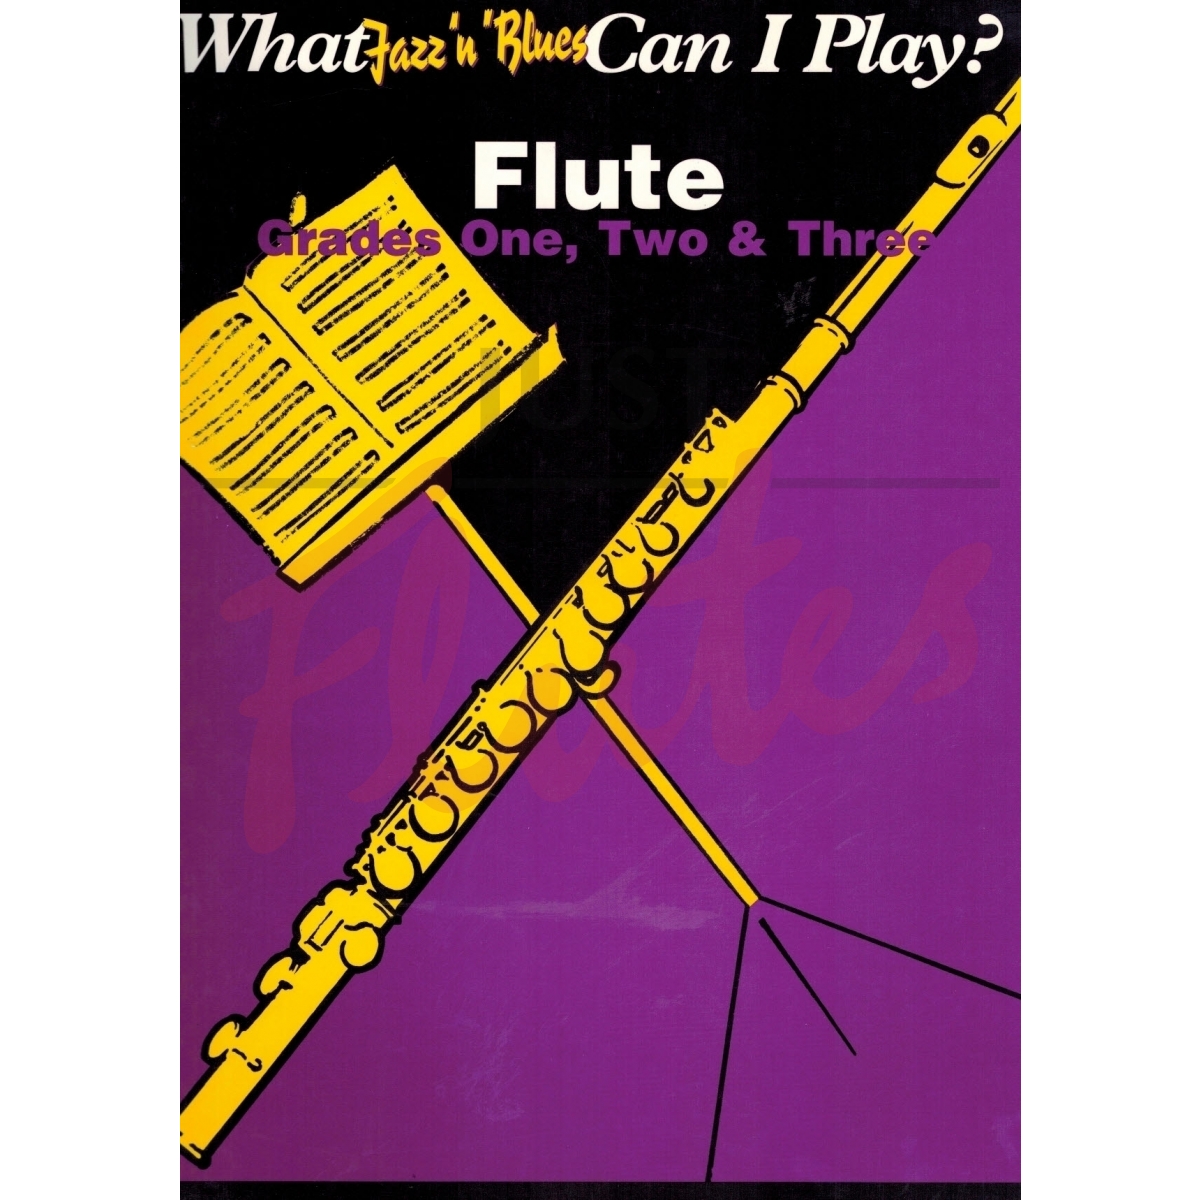 What Jazz 'n' Blues Can I Play? [Flute] Grades 1-3